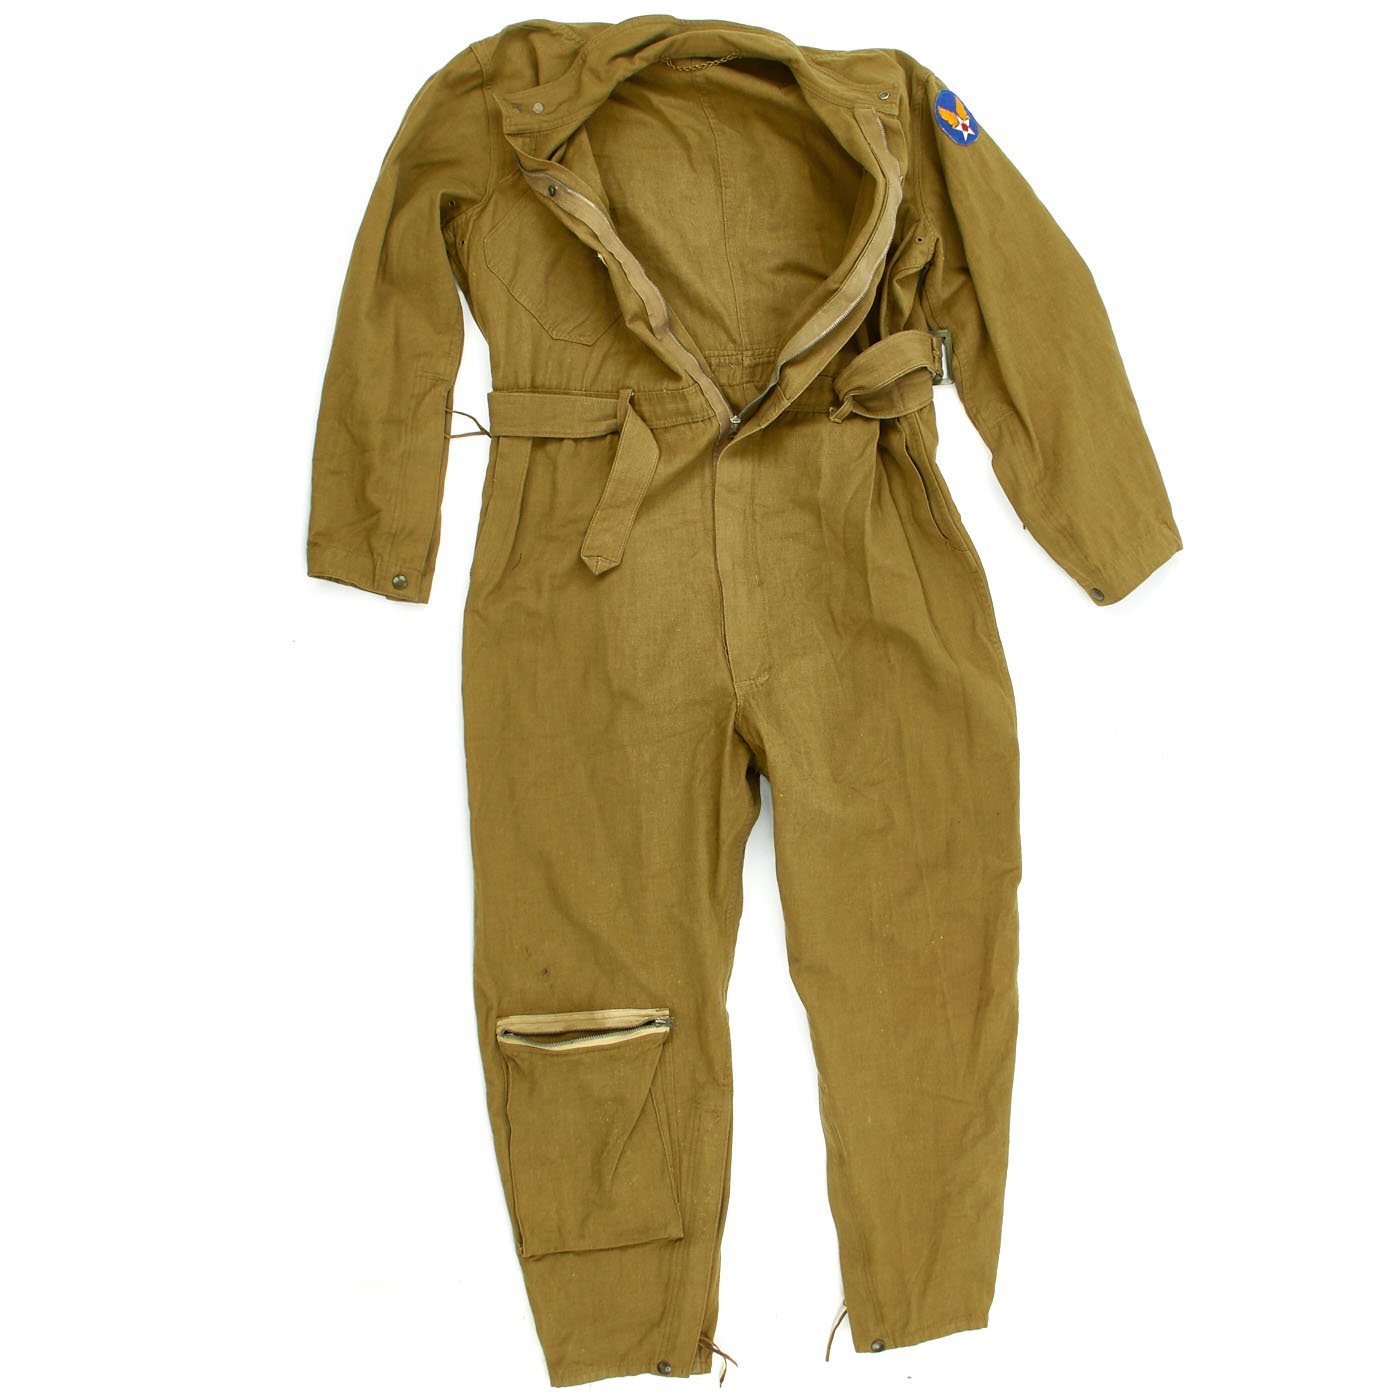 U.S. WWII Army Air Force Summer Type A-4 Flight Suit with Leather 